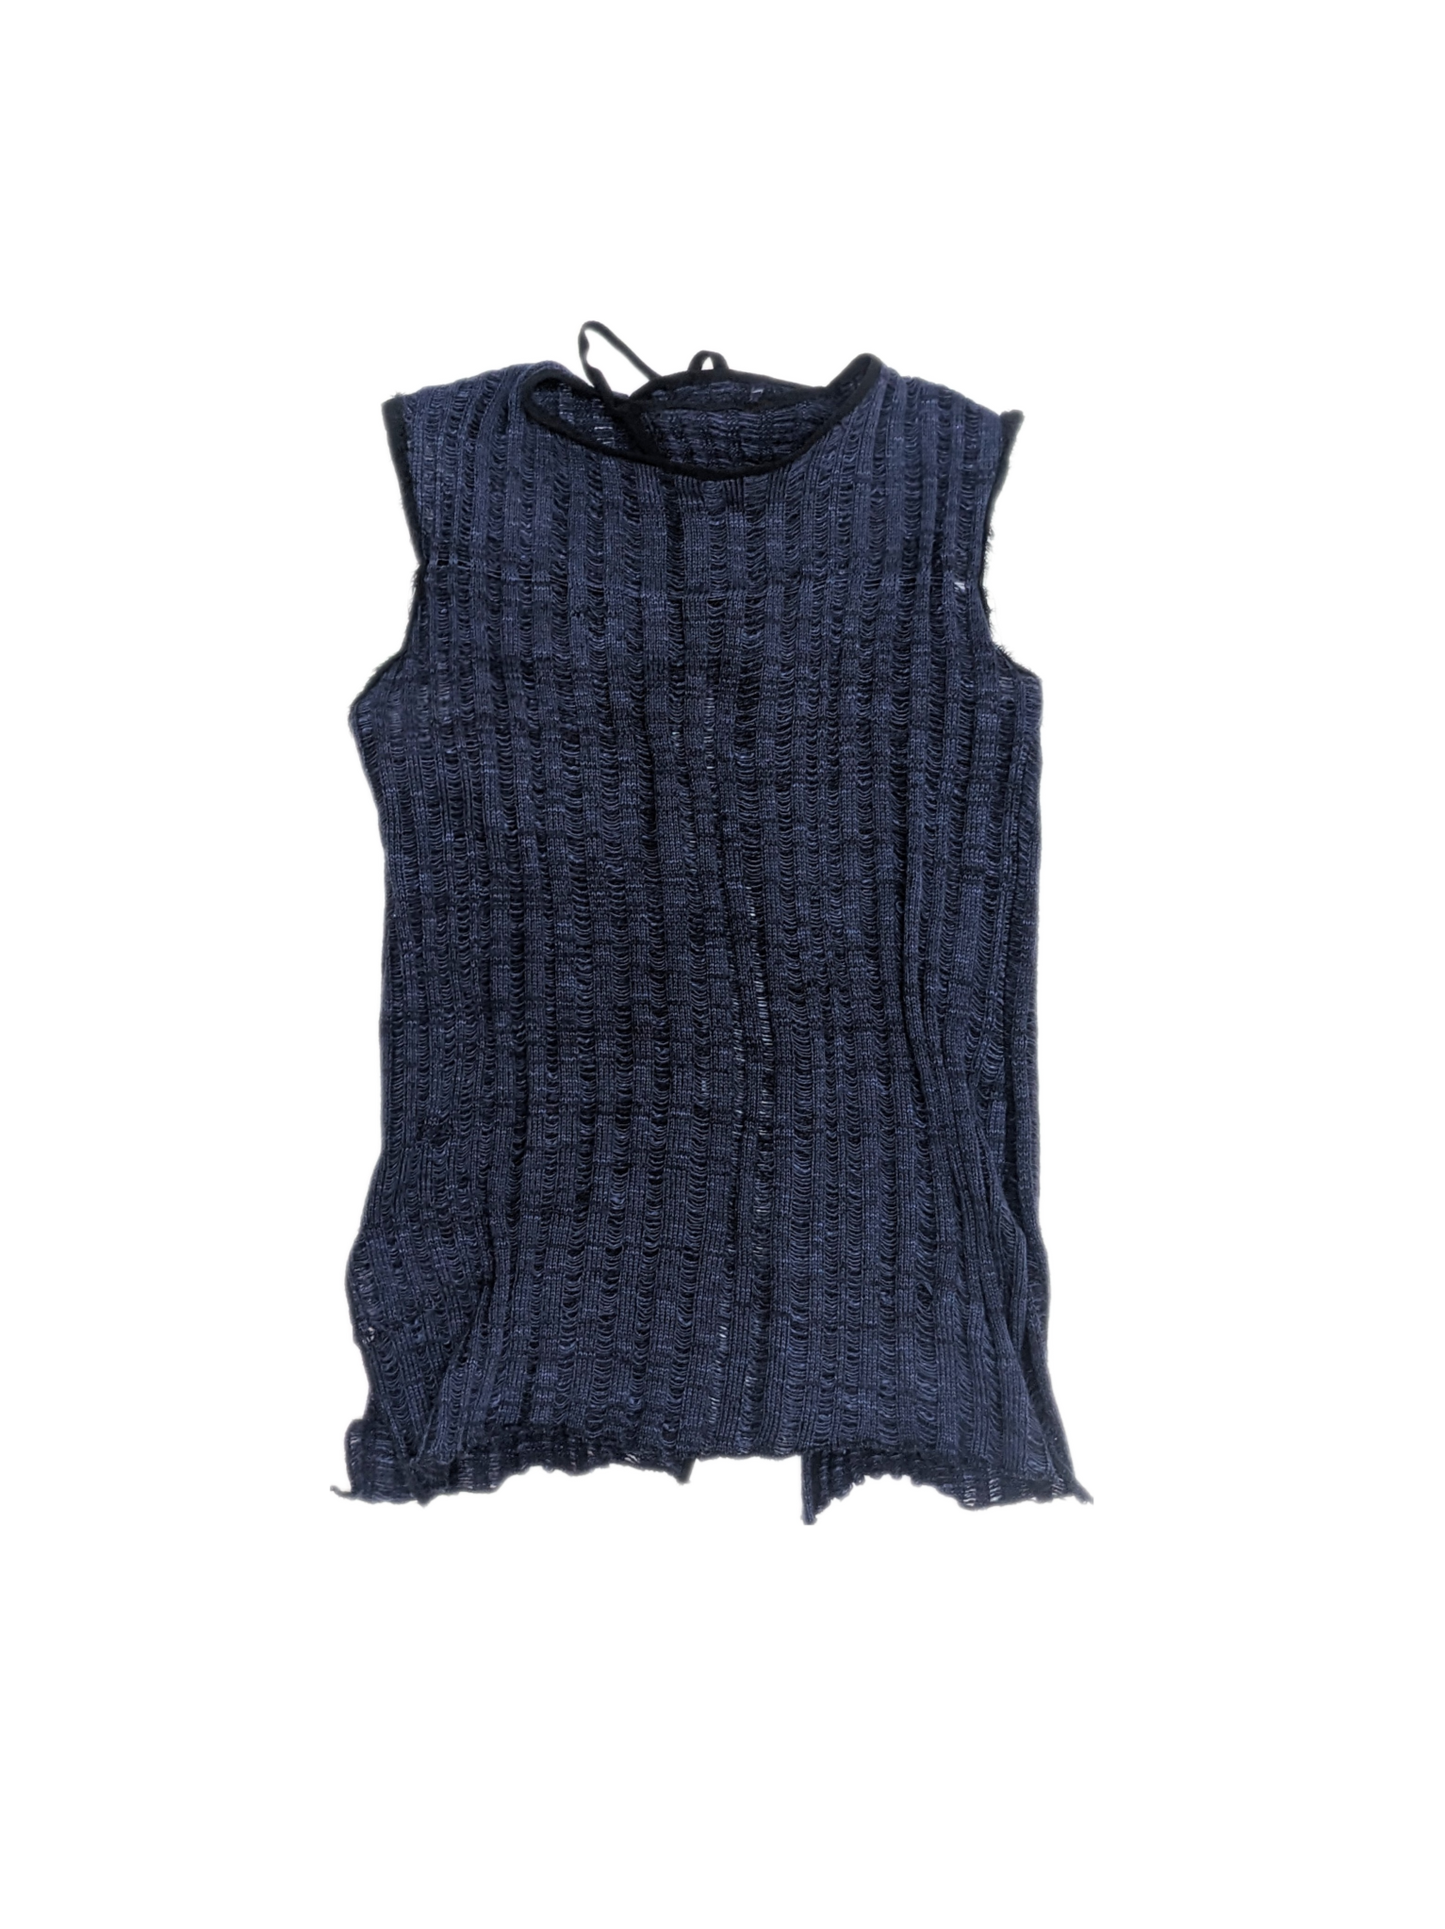 Sleeveless Hand Knitted Jumper in Navy Shetland Wool with Open Back and Cotton Twill Ties